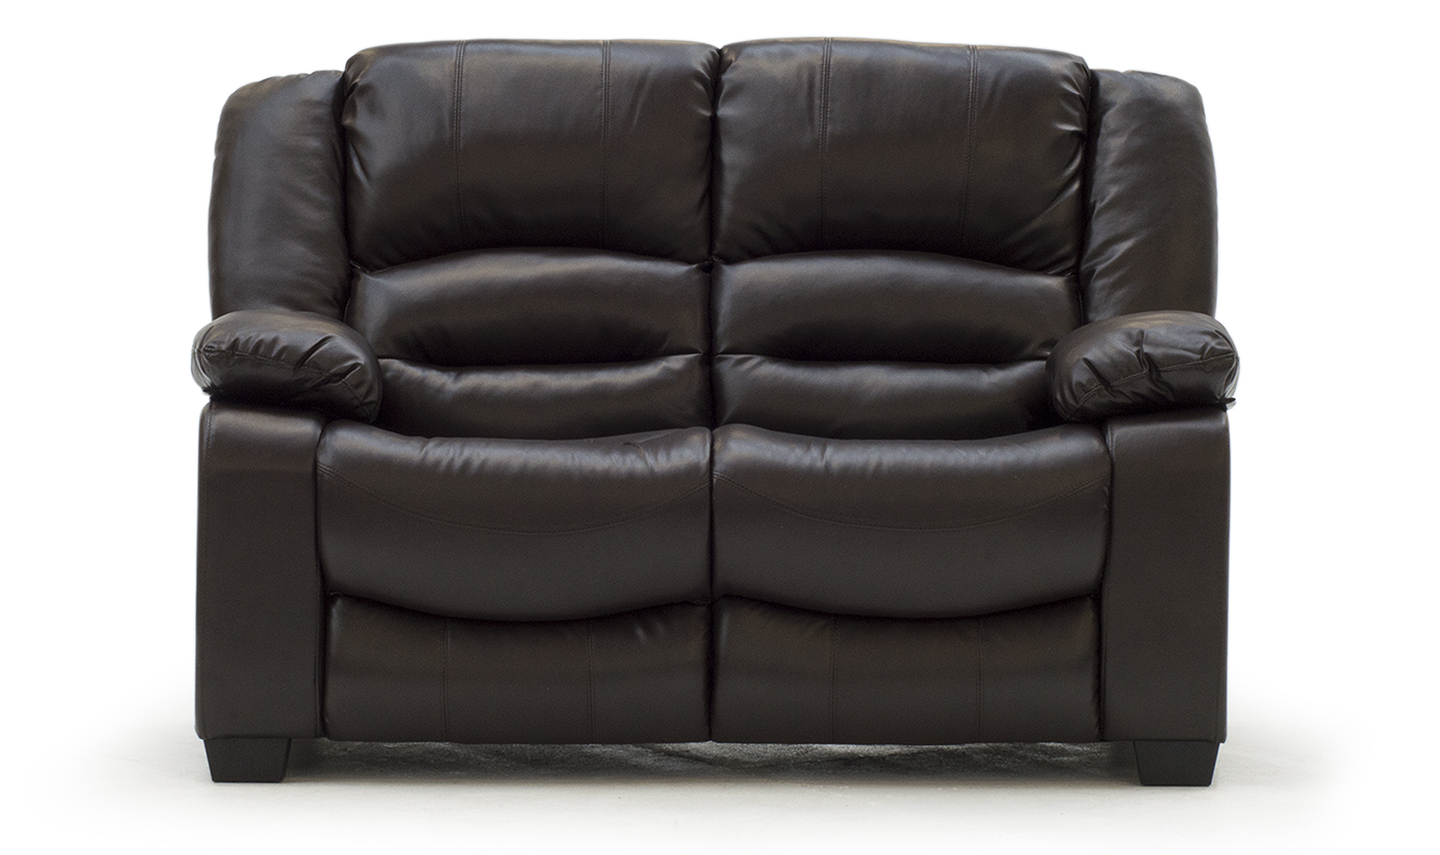 Barletto Brown 2 Seater Leather Sofa